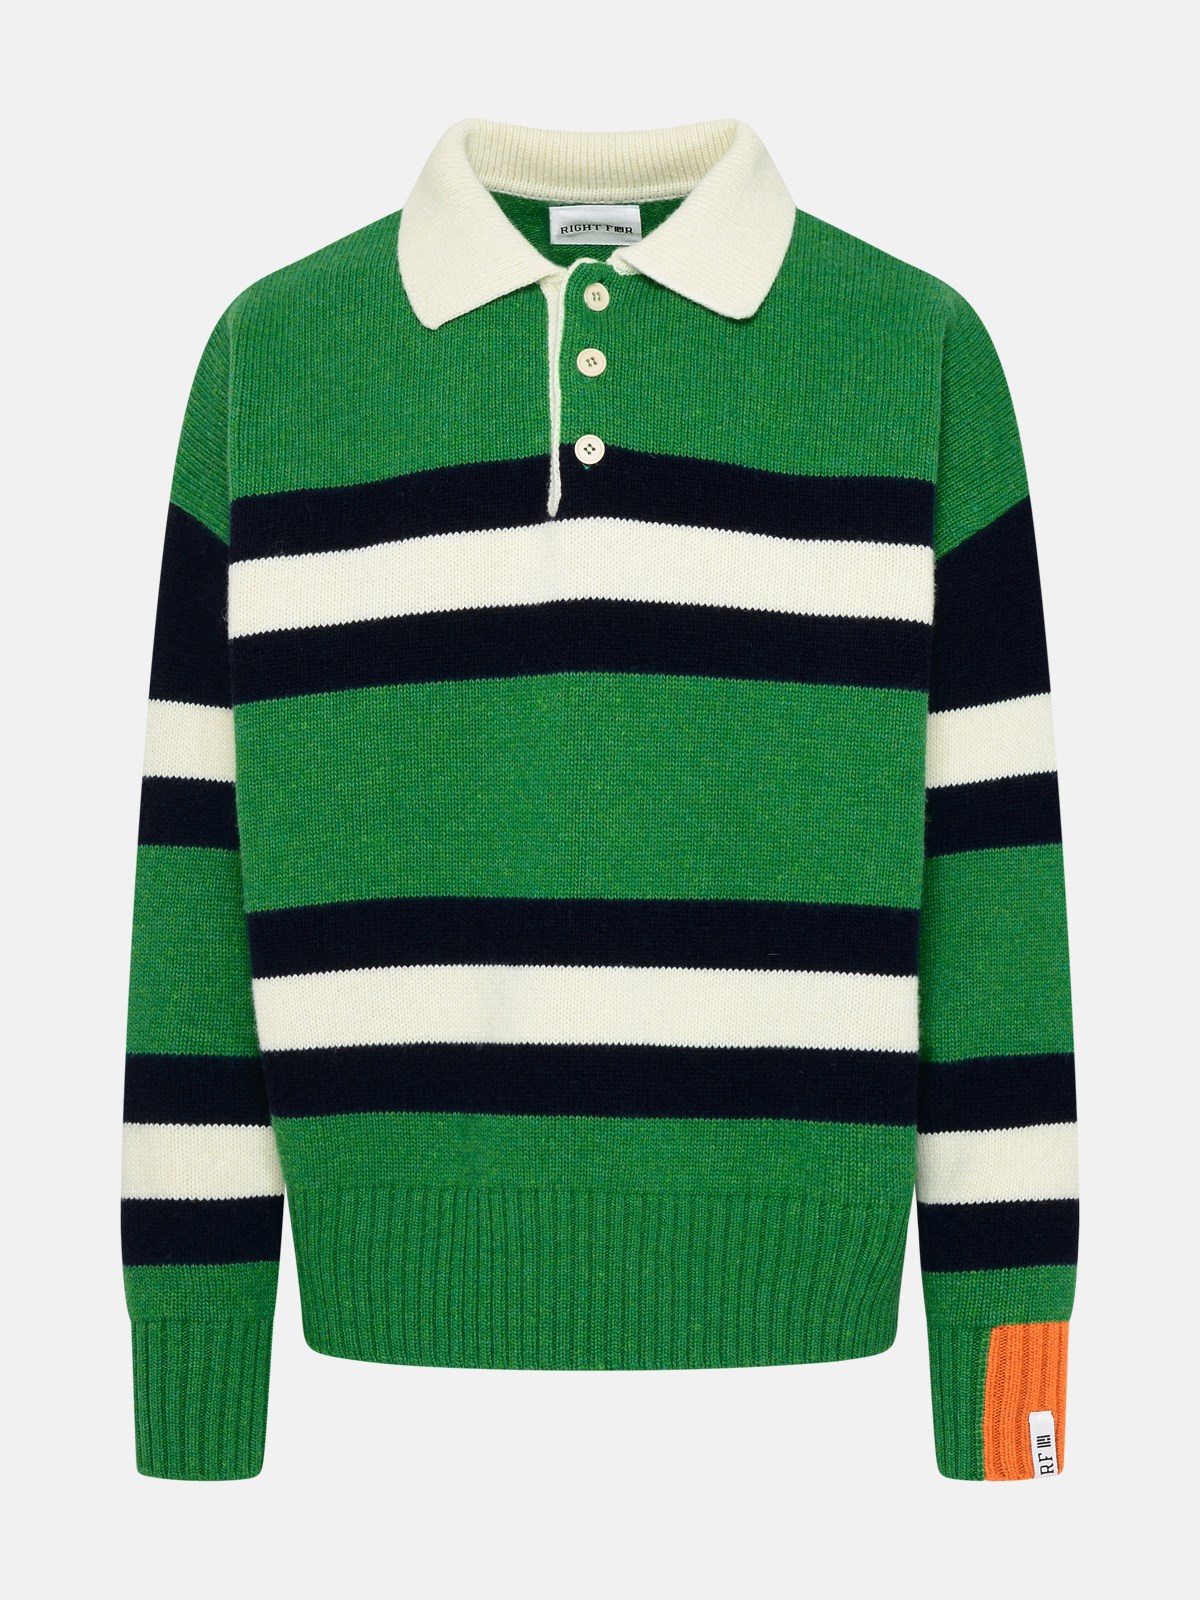 Right For Green Wool Jumper